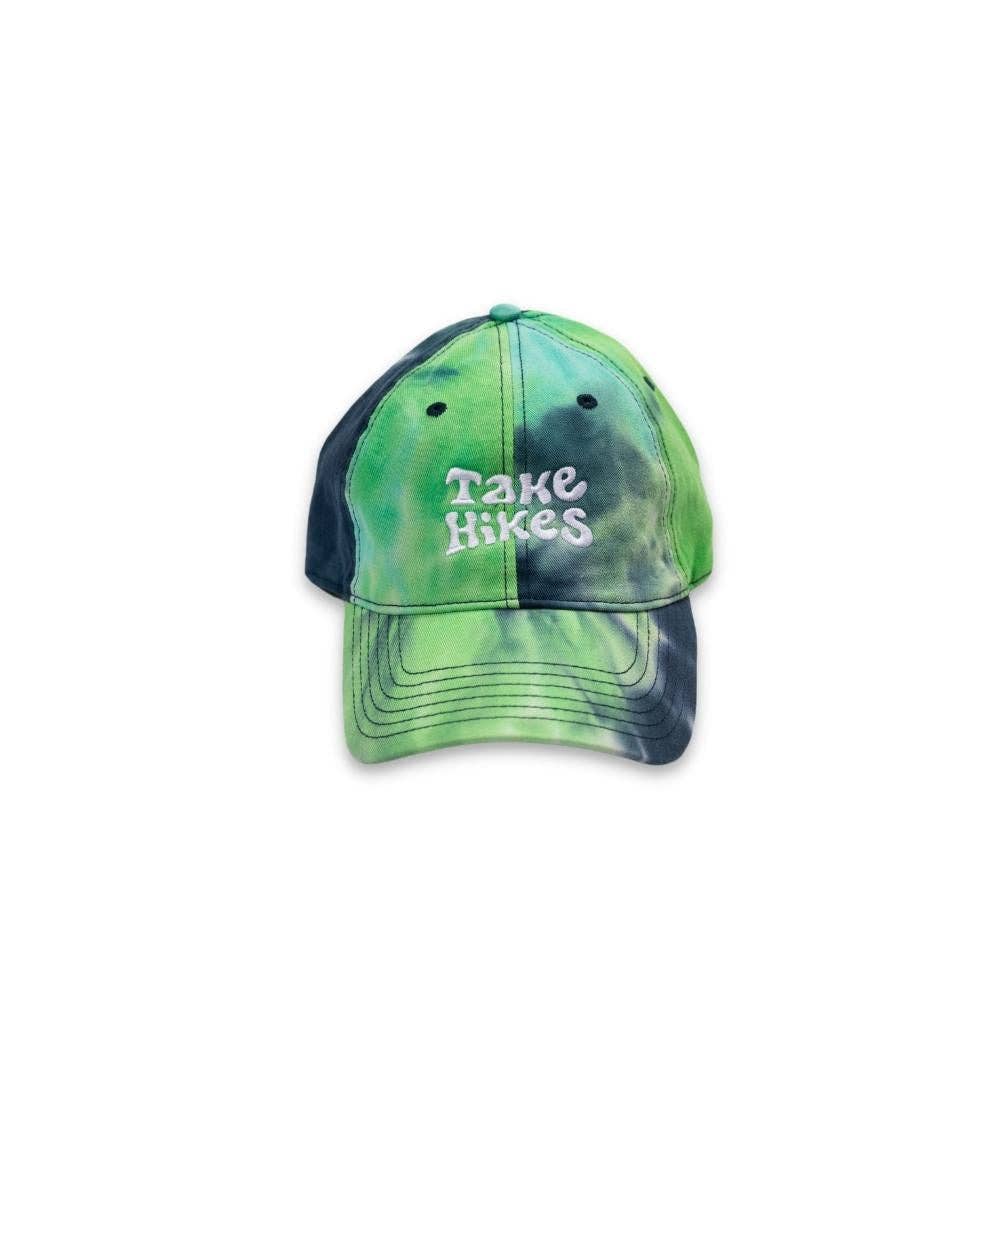 Ocean colored tie dye dad hat that reads Take Hikes